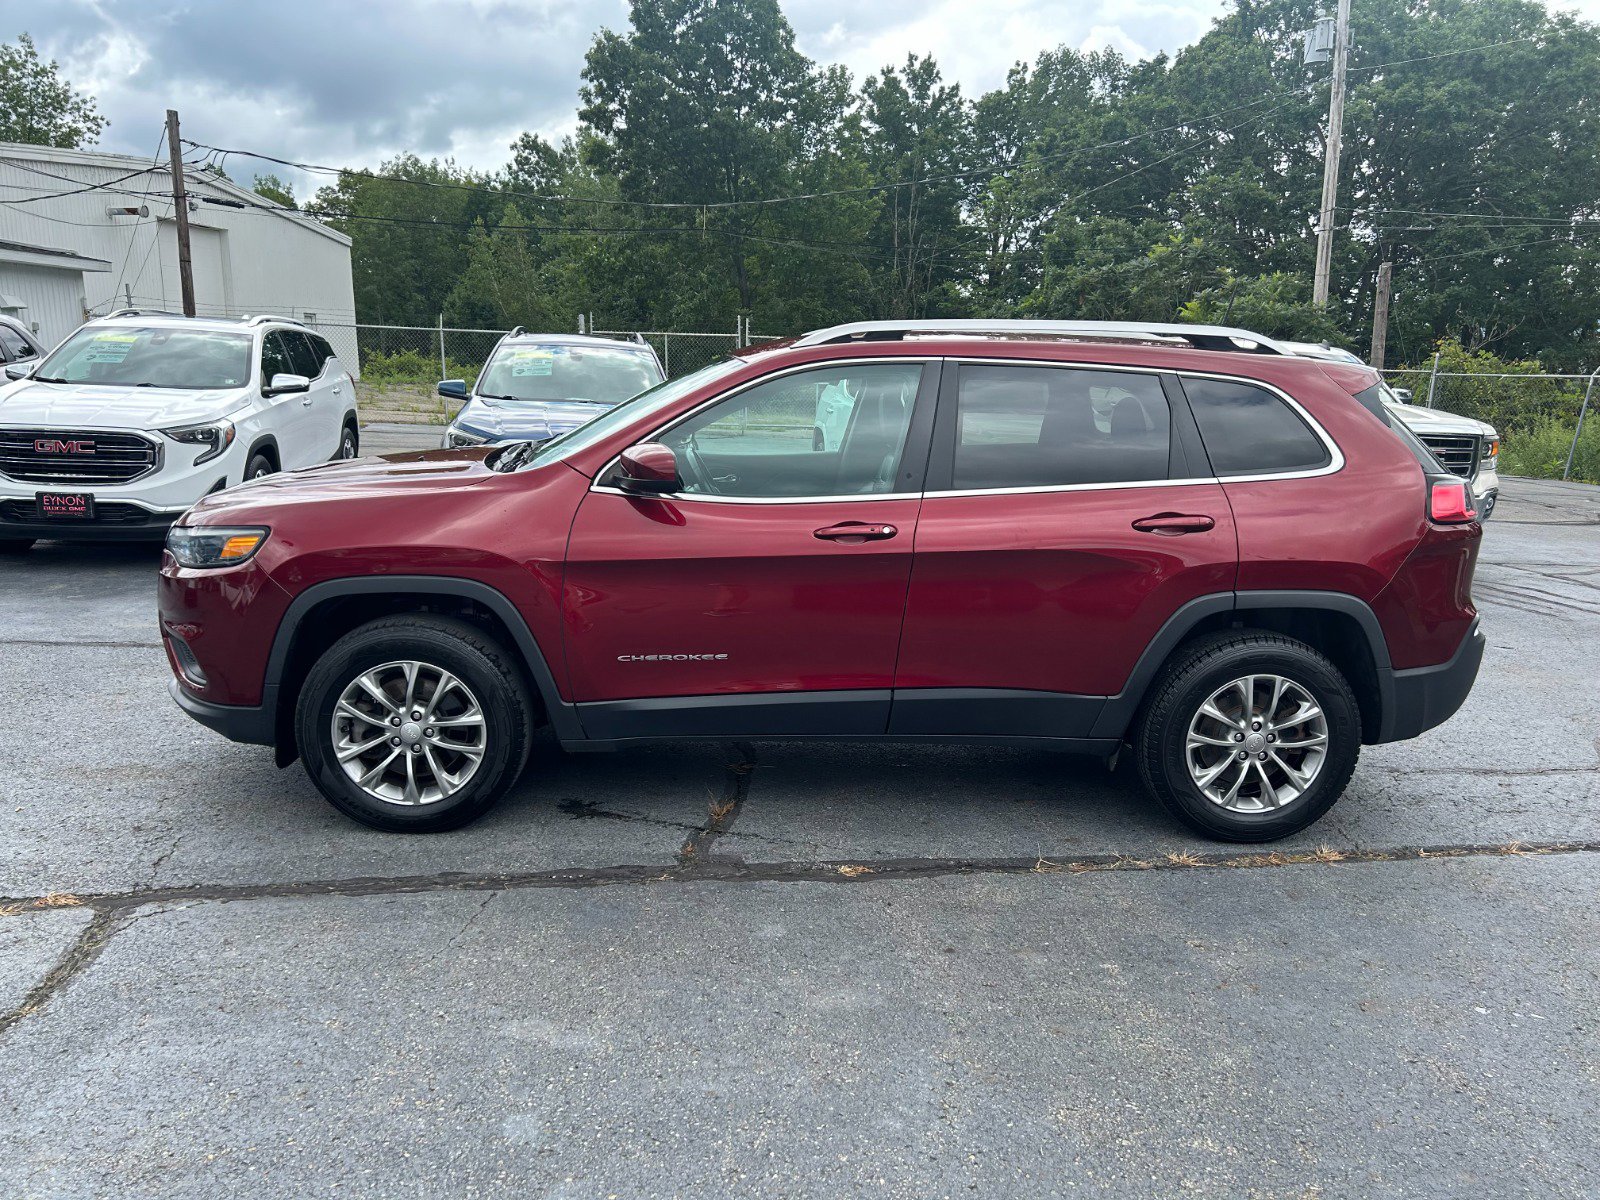 Used 2019 Jeep Cherokee Latitude Plus with VIN 1C4PJMLB9KD198864 for sale in Olyphant, PA